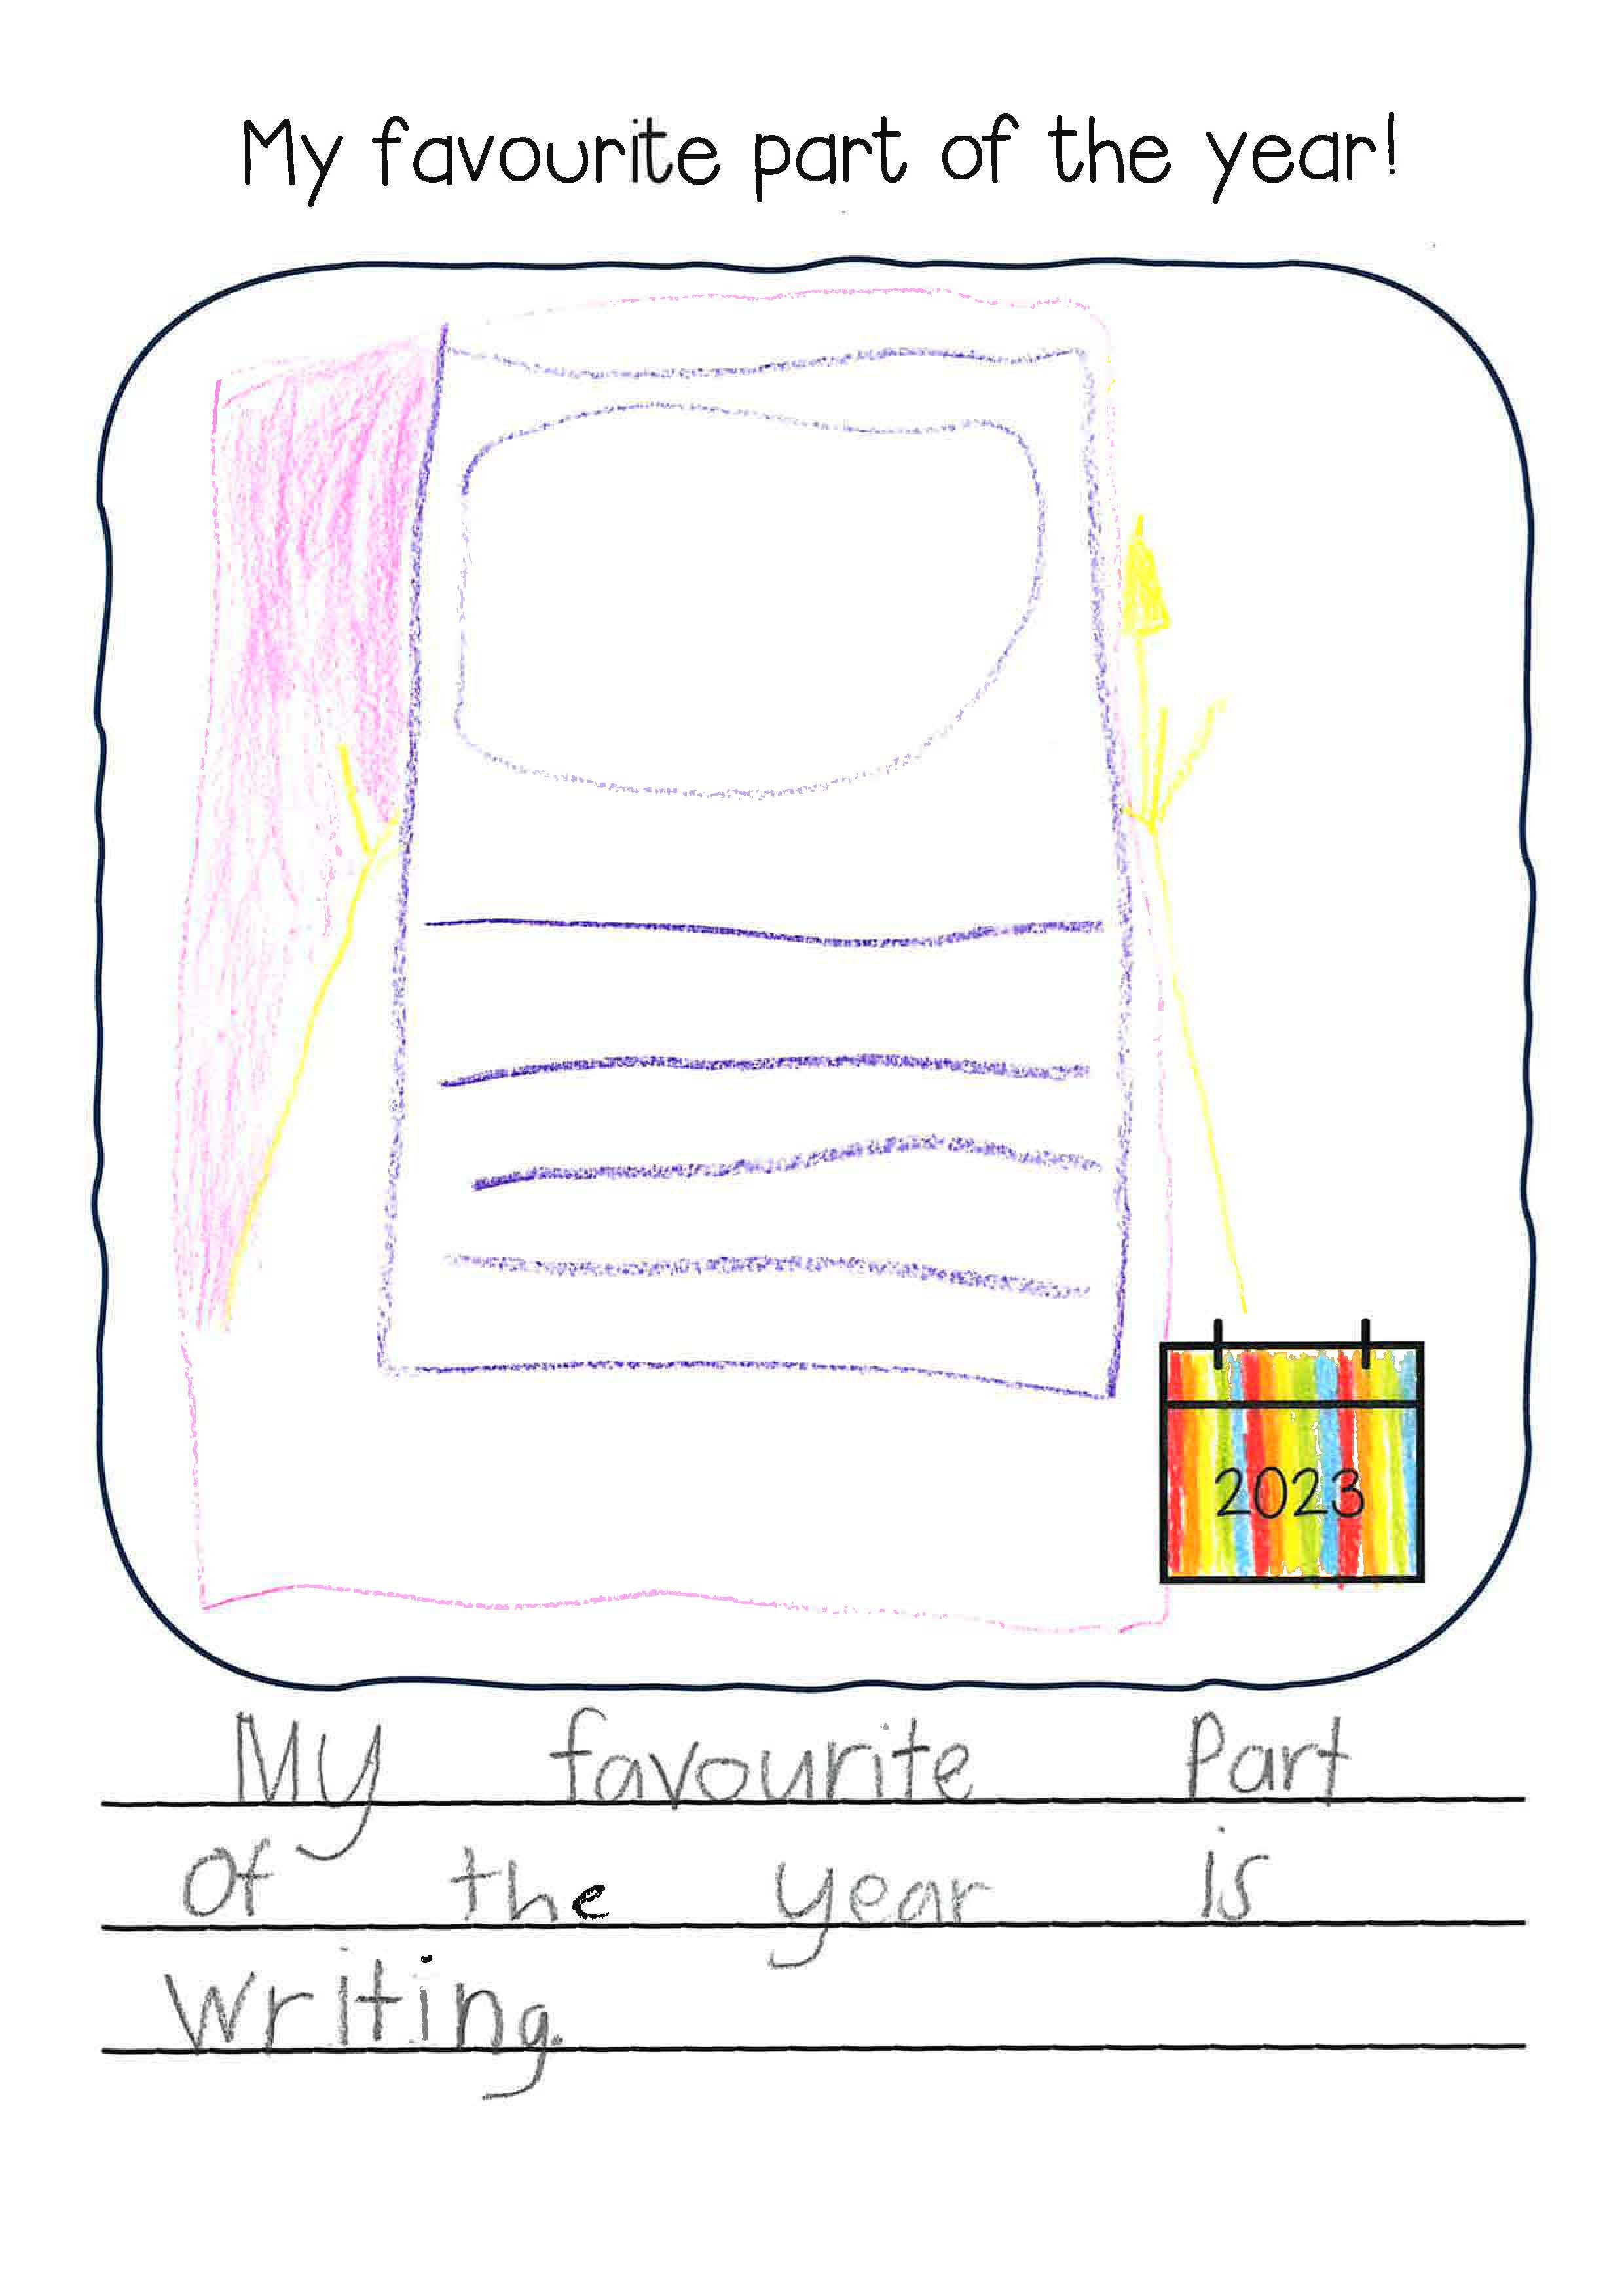 YR 1 Student's favourite parts of year one_Page_07